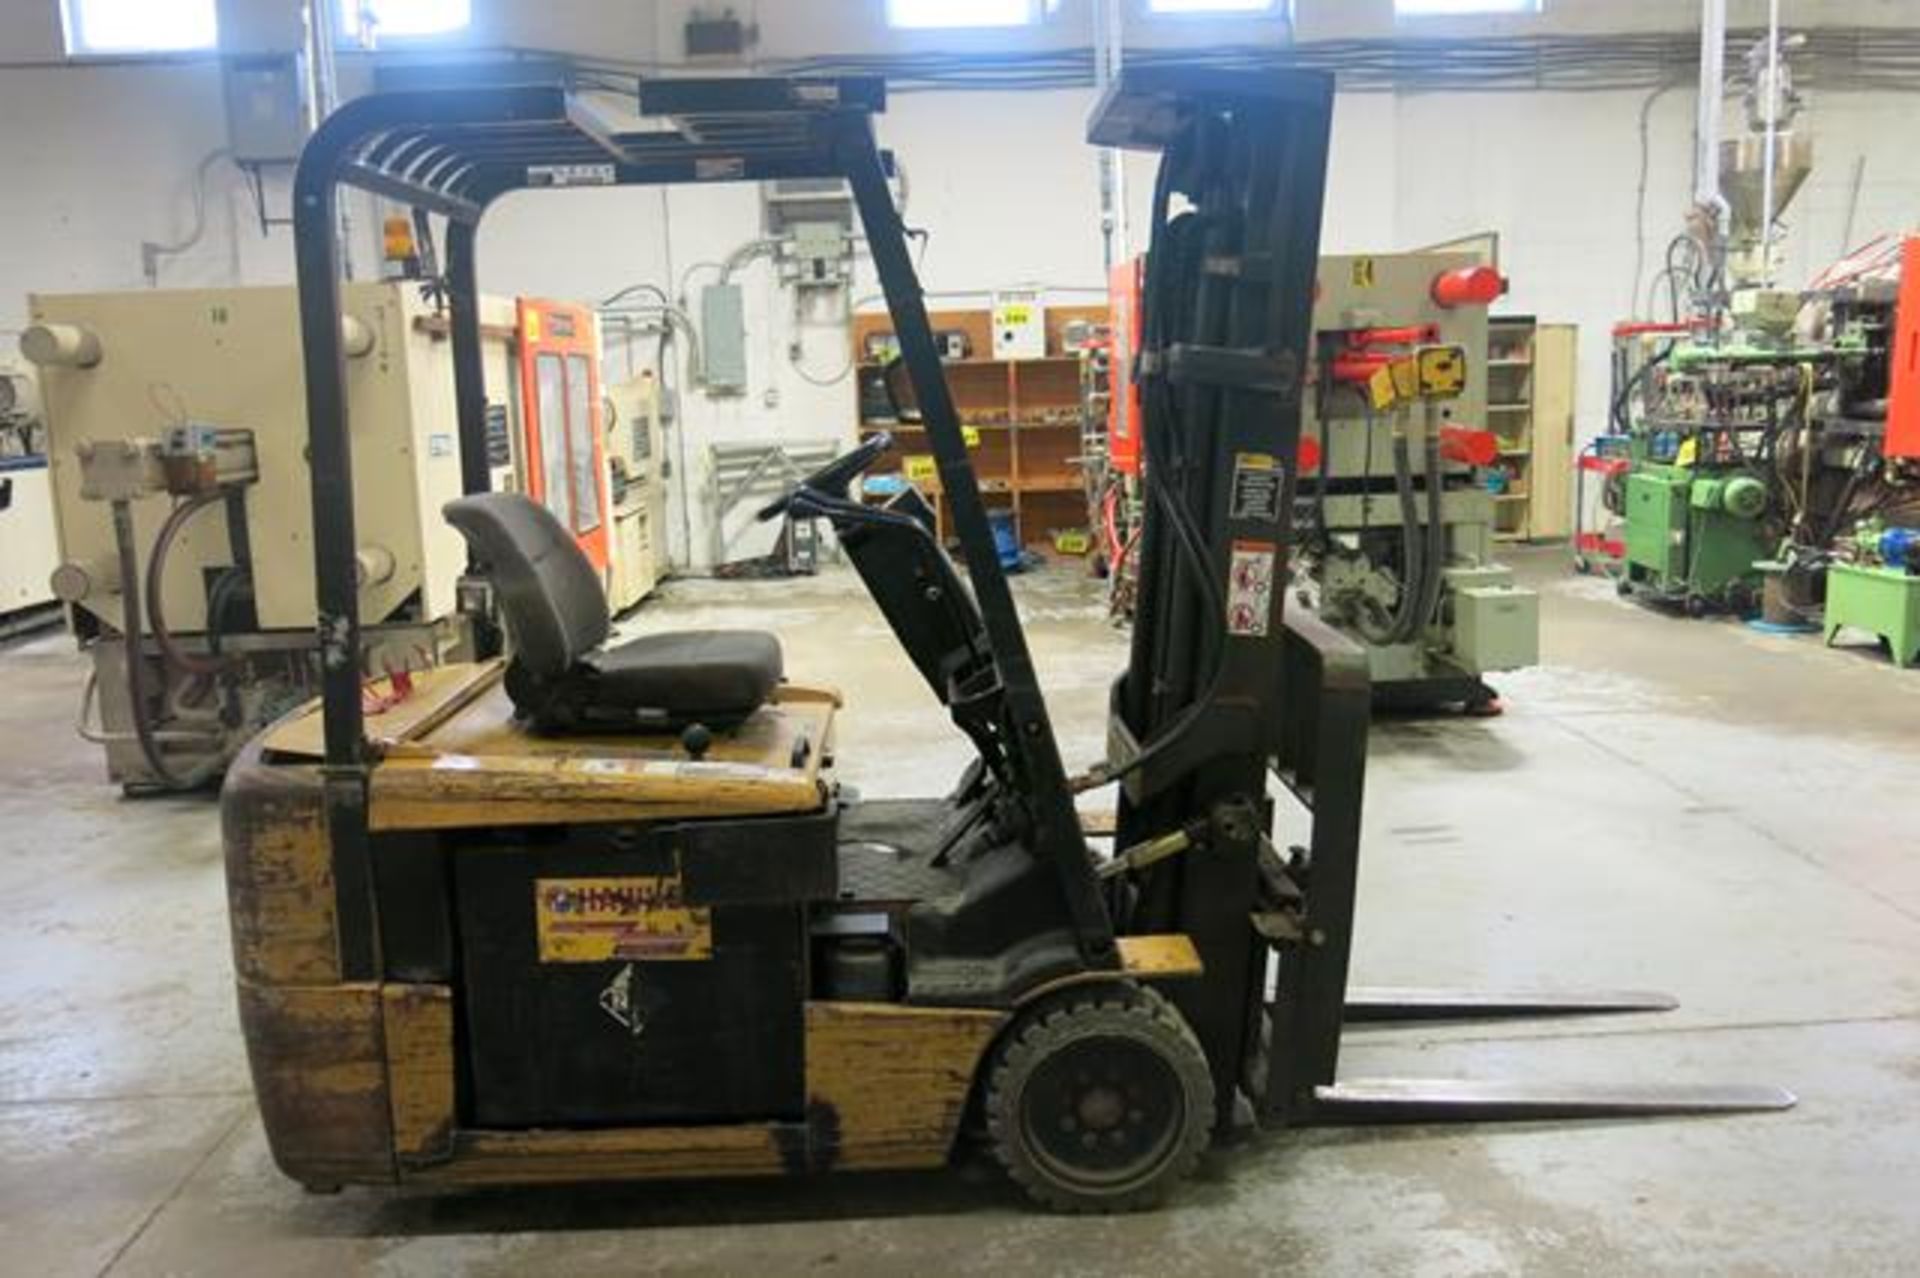 CATERPILLAR, EP20KT, 3,700 LBS., 3 STAGE, 3-WHEEL, BATTERY POWERED, FORKLIFT, SIDESHIFT, 188" - Image 6 of 13